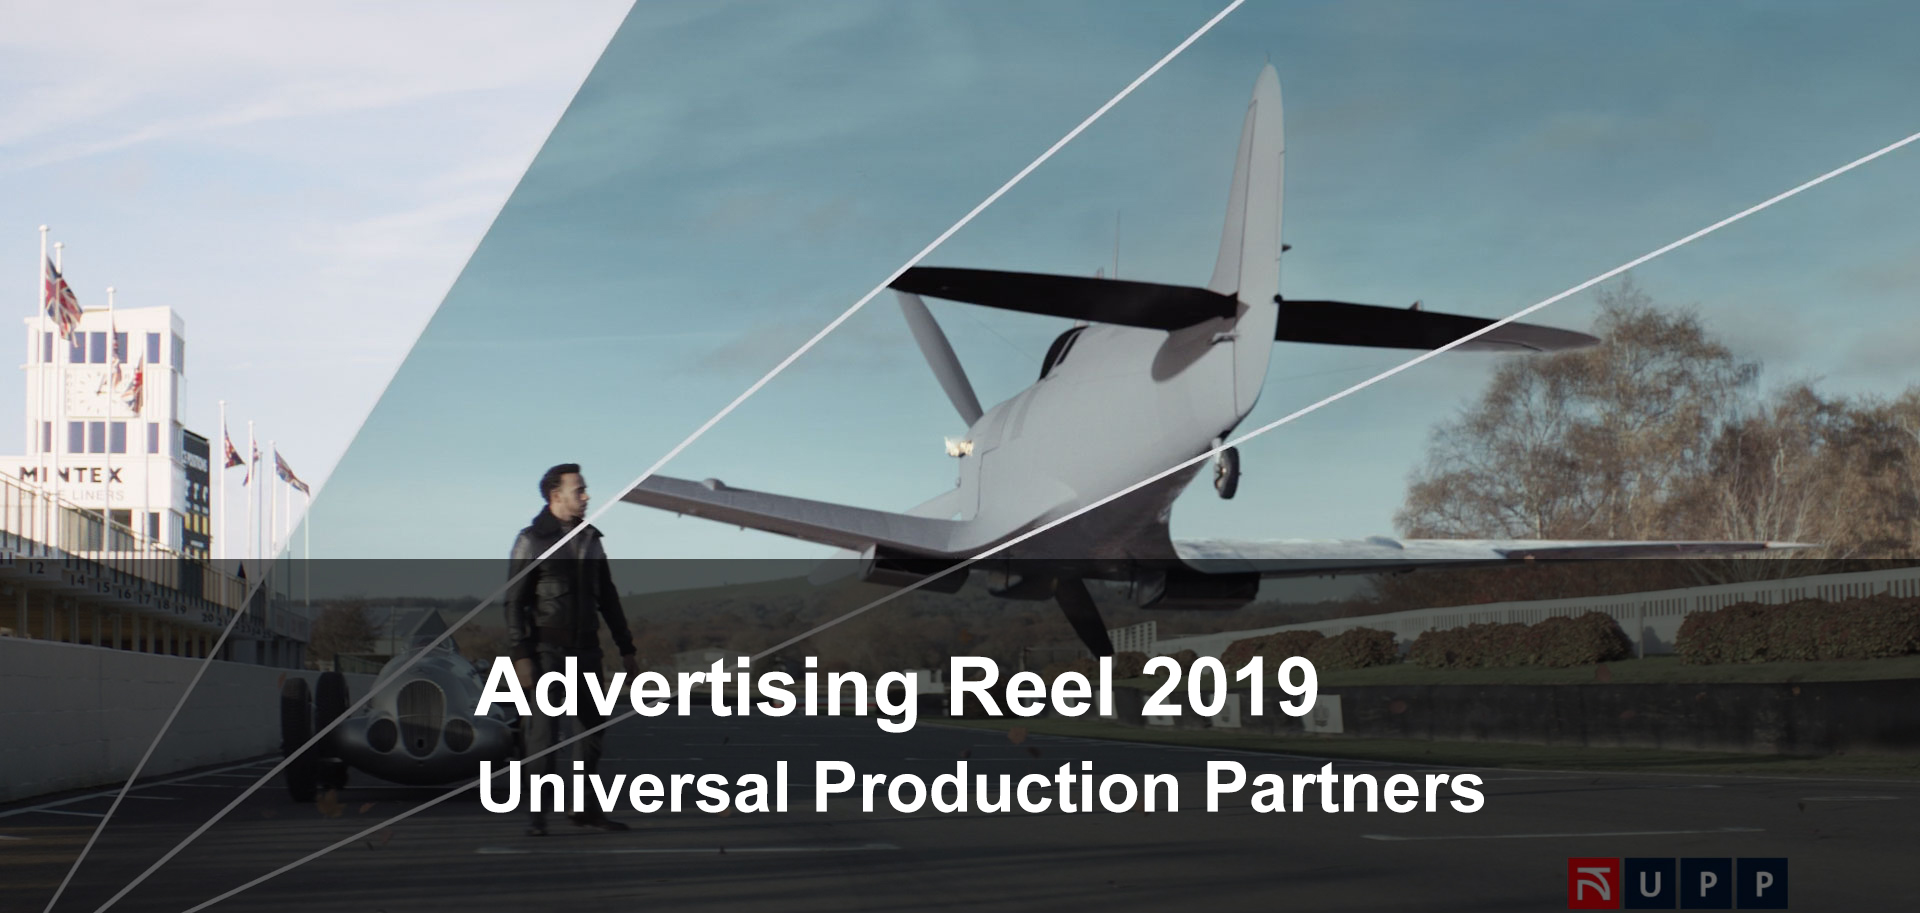 Universal Production Partners Advertising Reel 2019